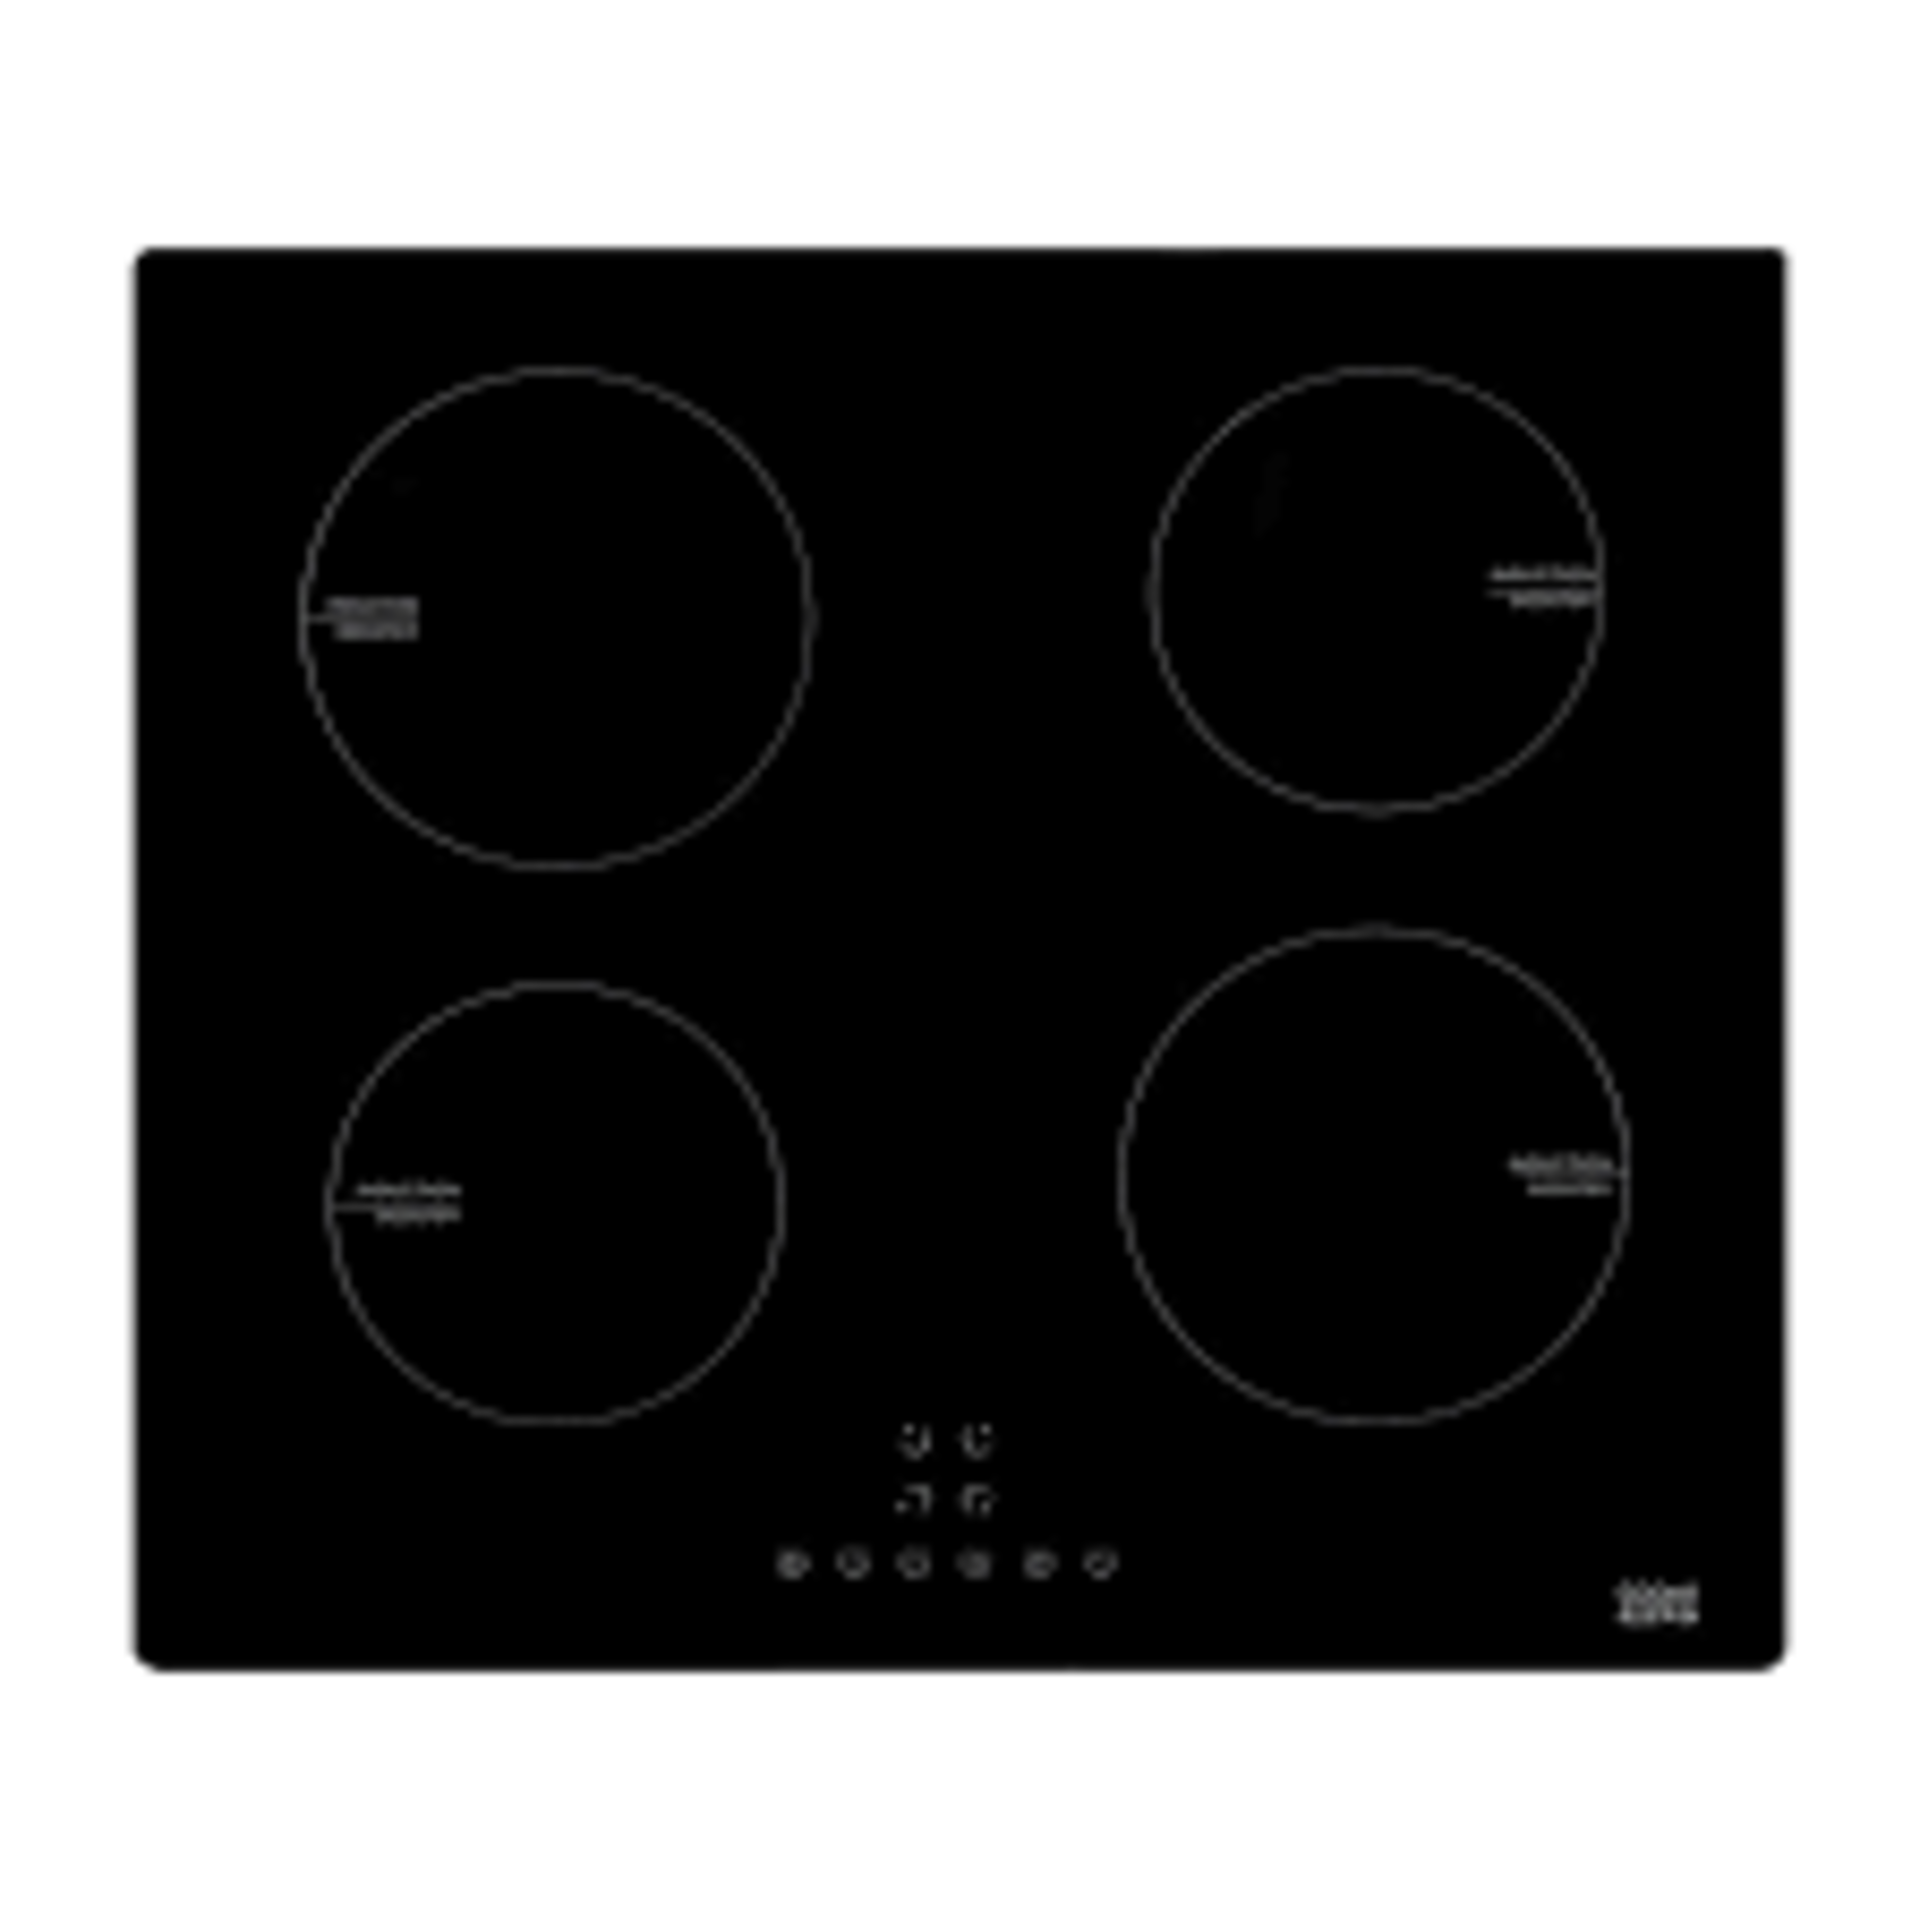 Cooke & Lewis CLIND60 59cm Induction Hob - Black. -ER23. This Glass induction hob is stylish and